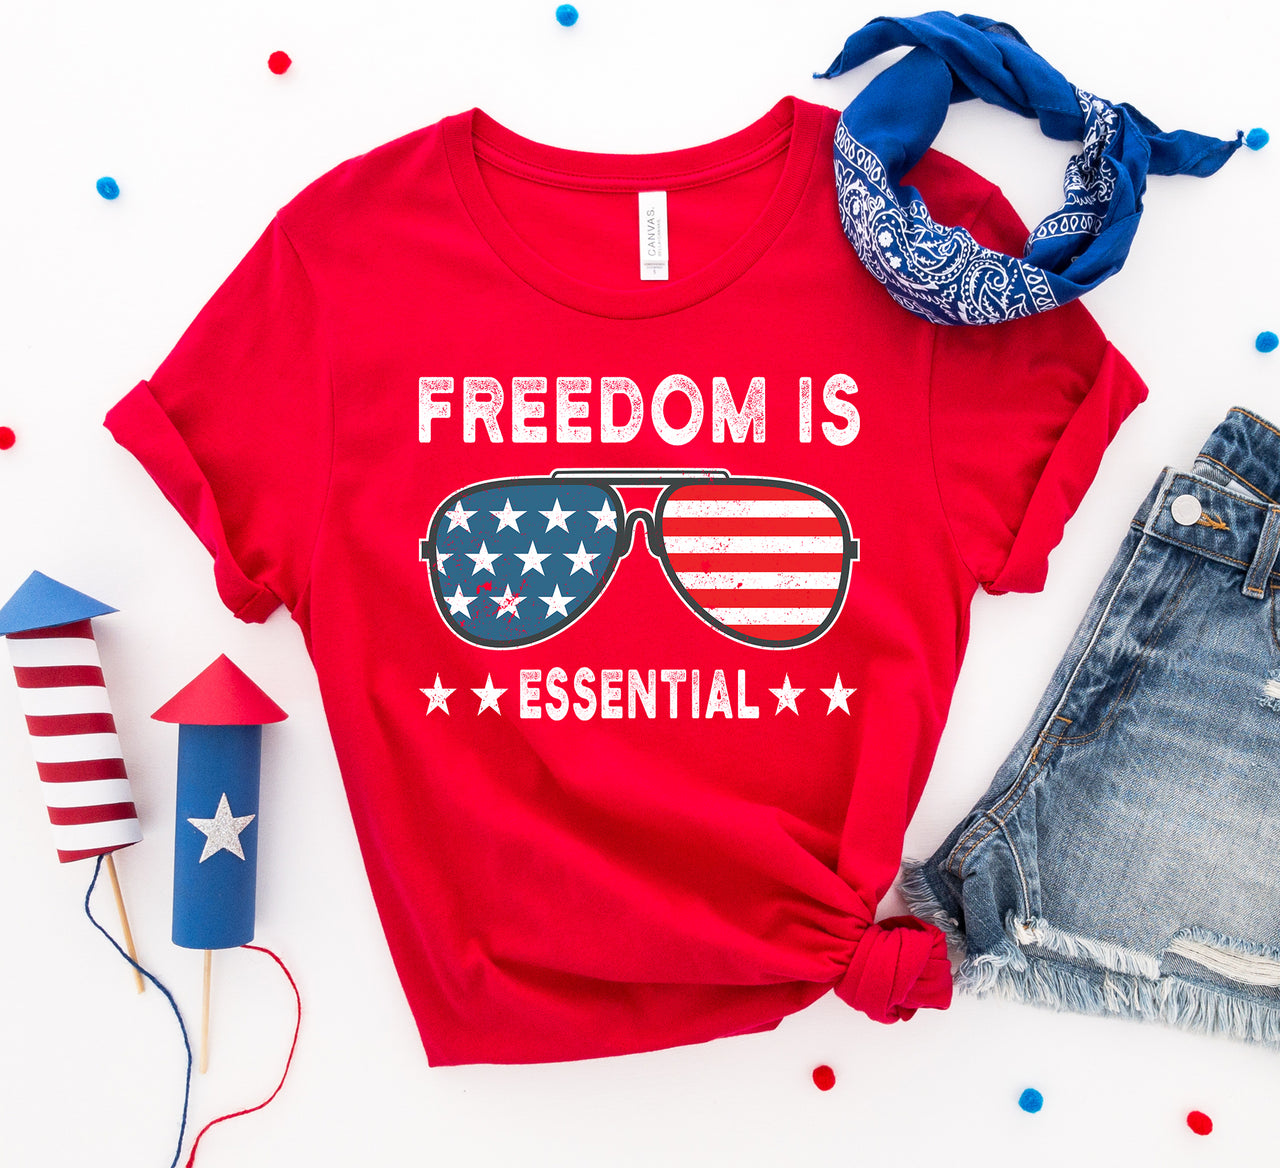 Freedom is essential T-shirt - Mercantile Mountain